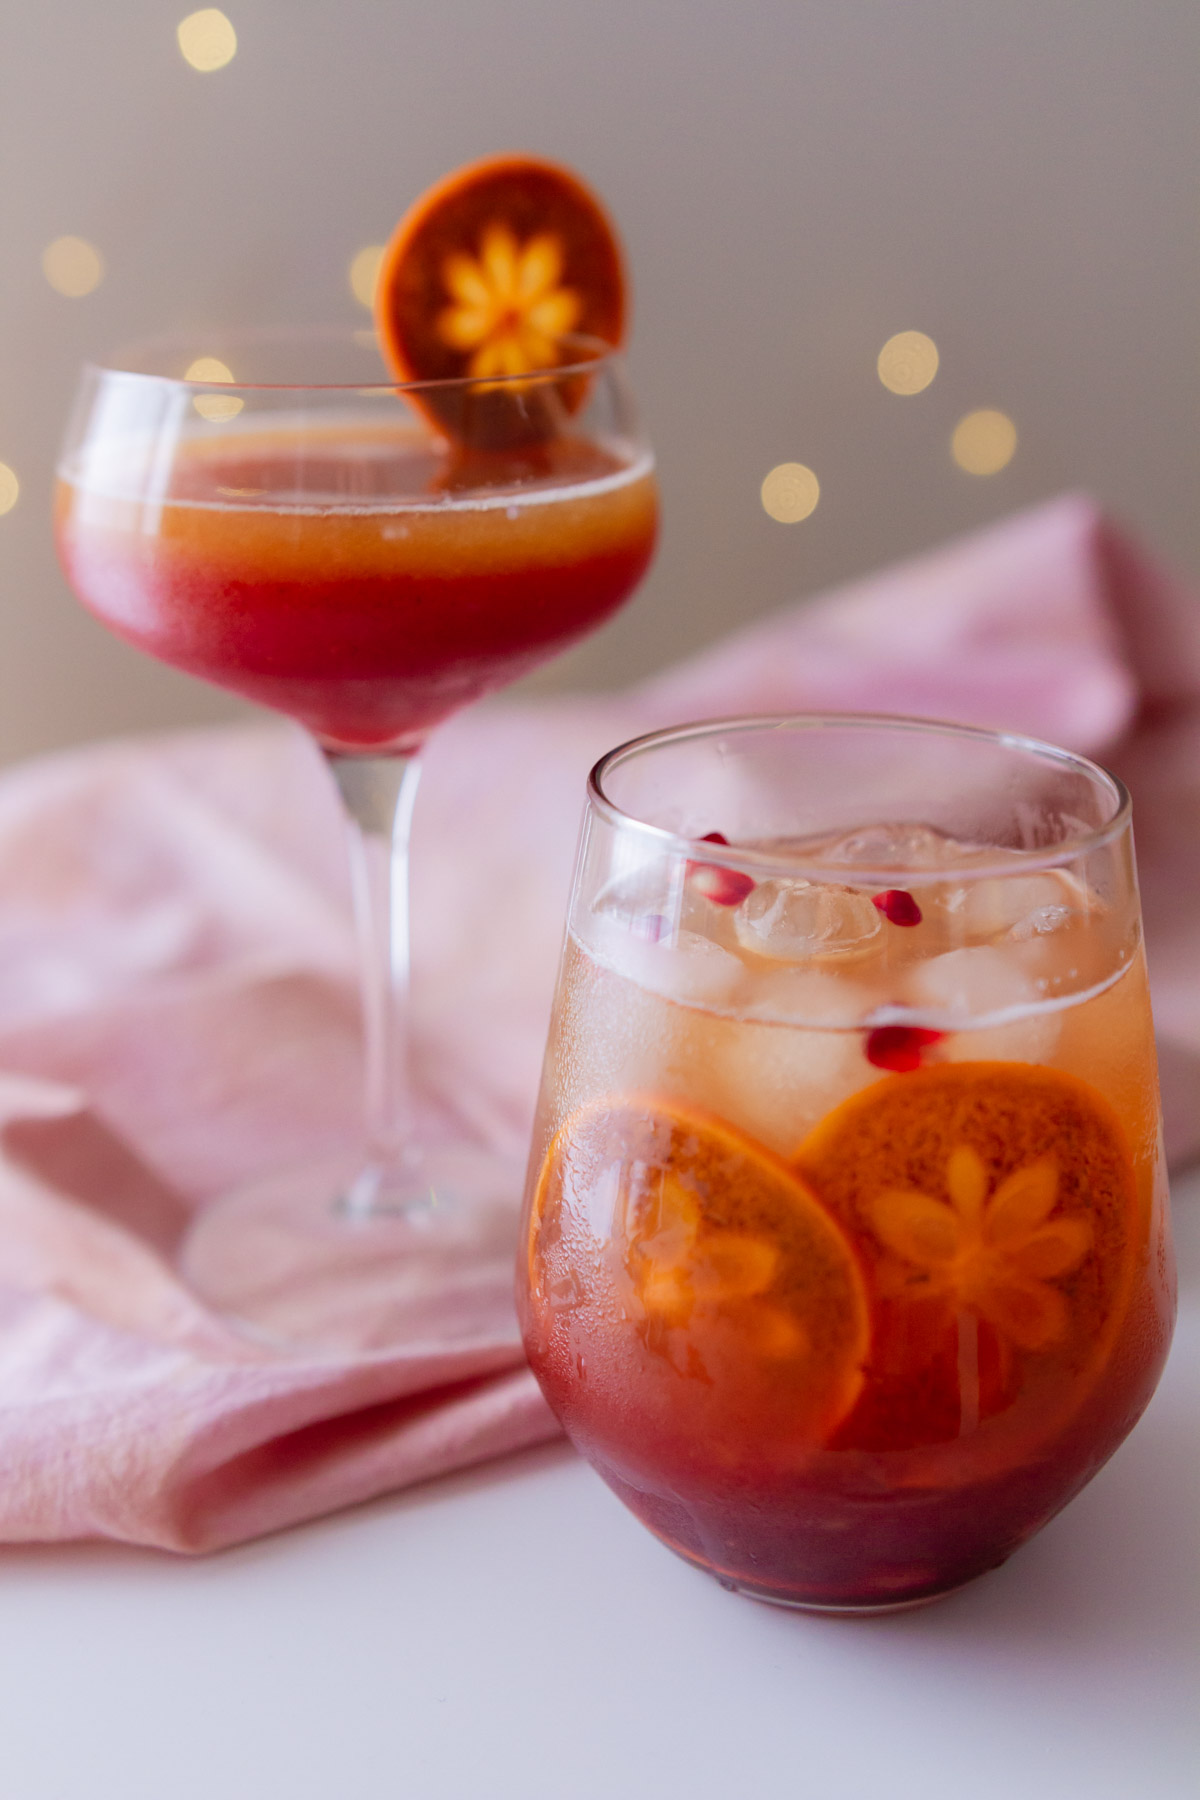 Sparkling pomegranate mocktail served in two different glasses with ice, slices of fuyu persimmon, and pomegranate arils.